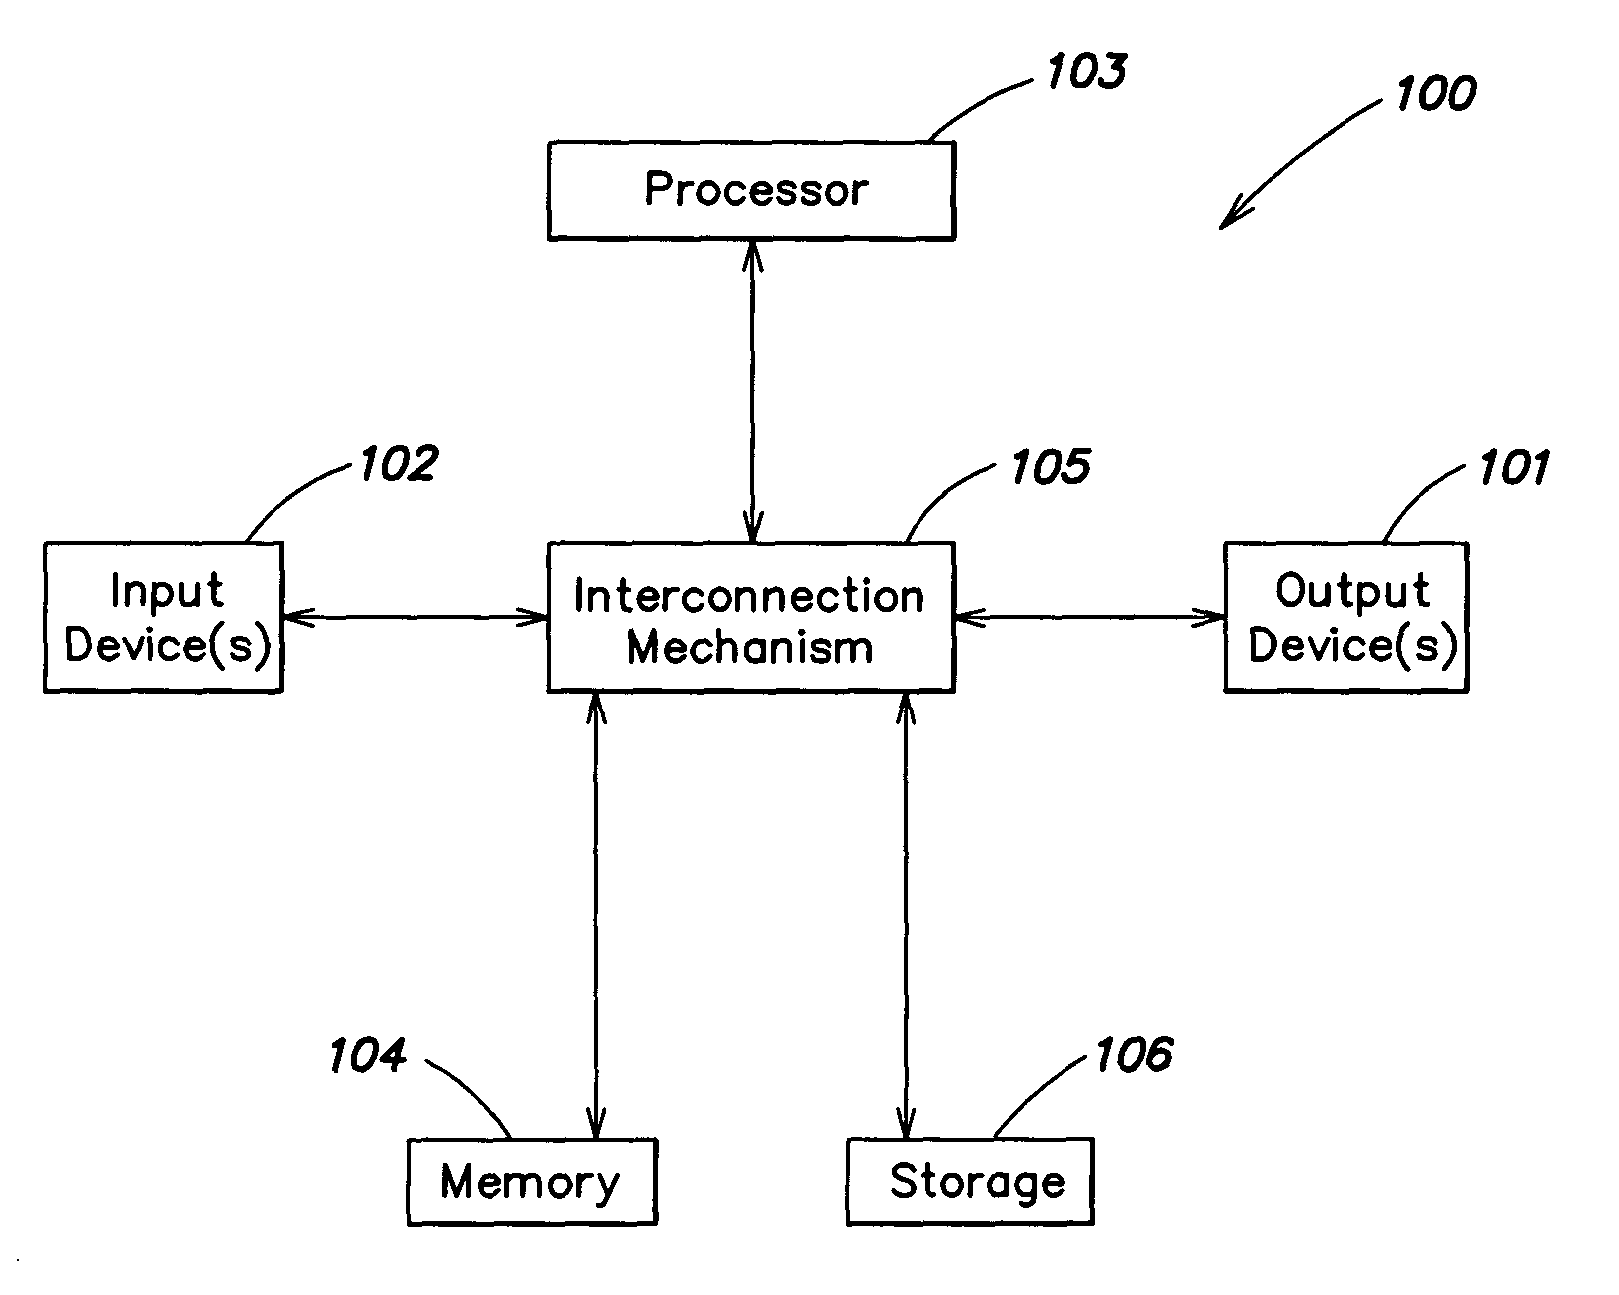 Differentiated management of wireless connectivity